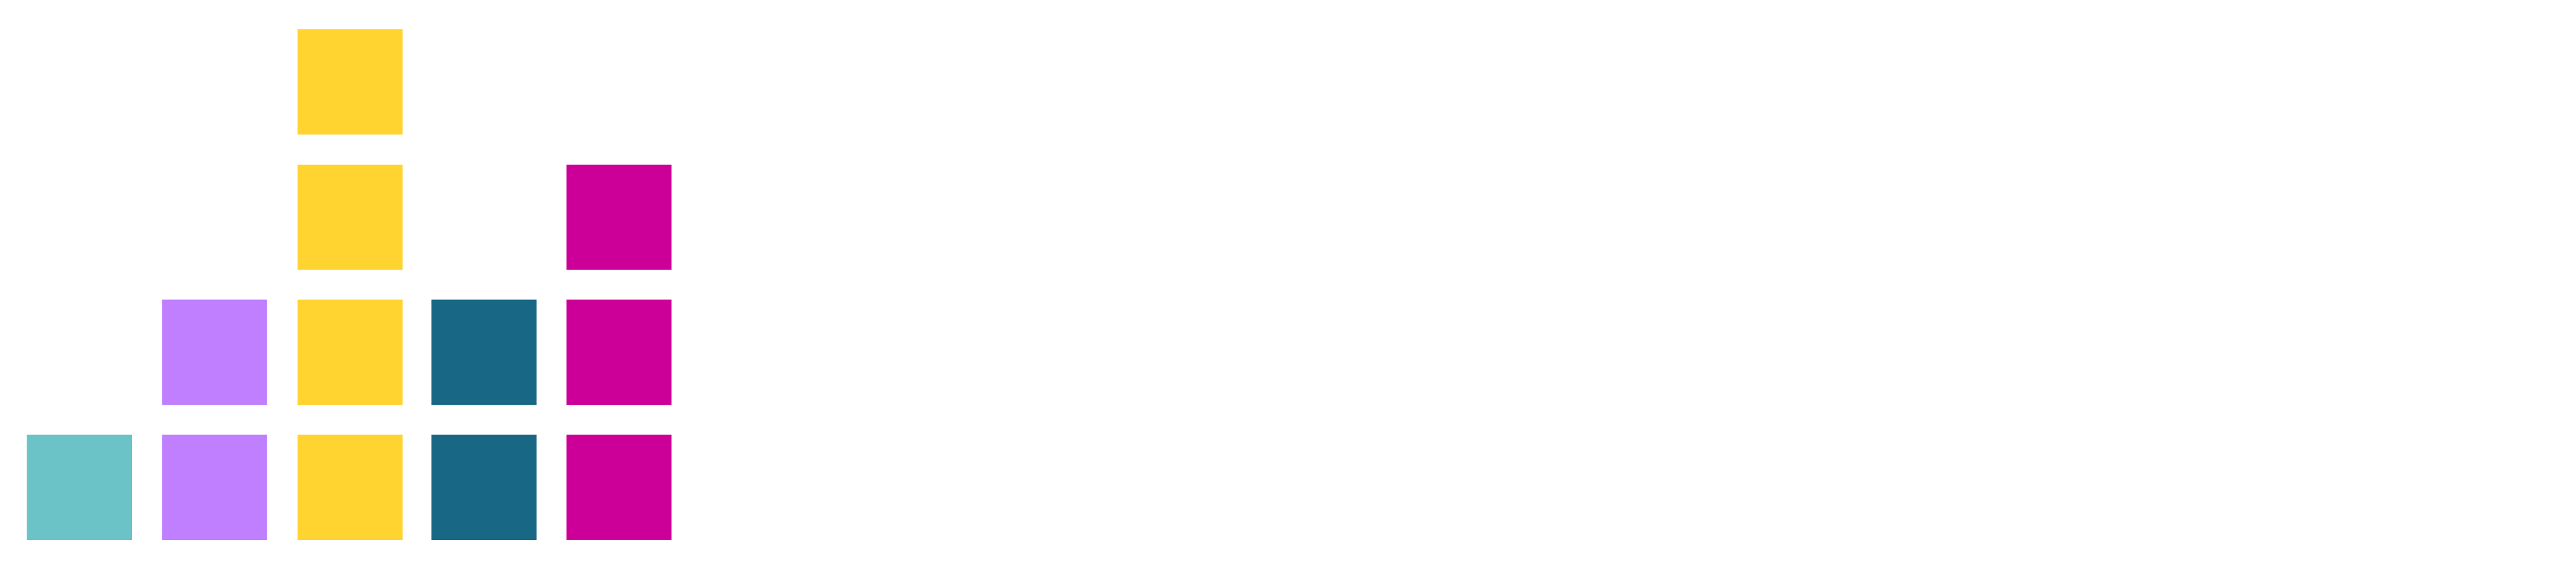 picture of a banner or logo from stackconf